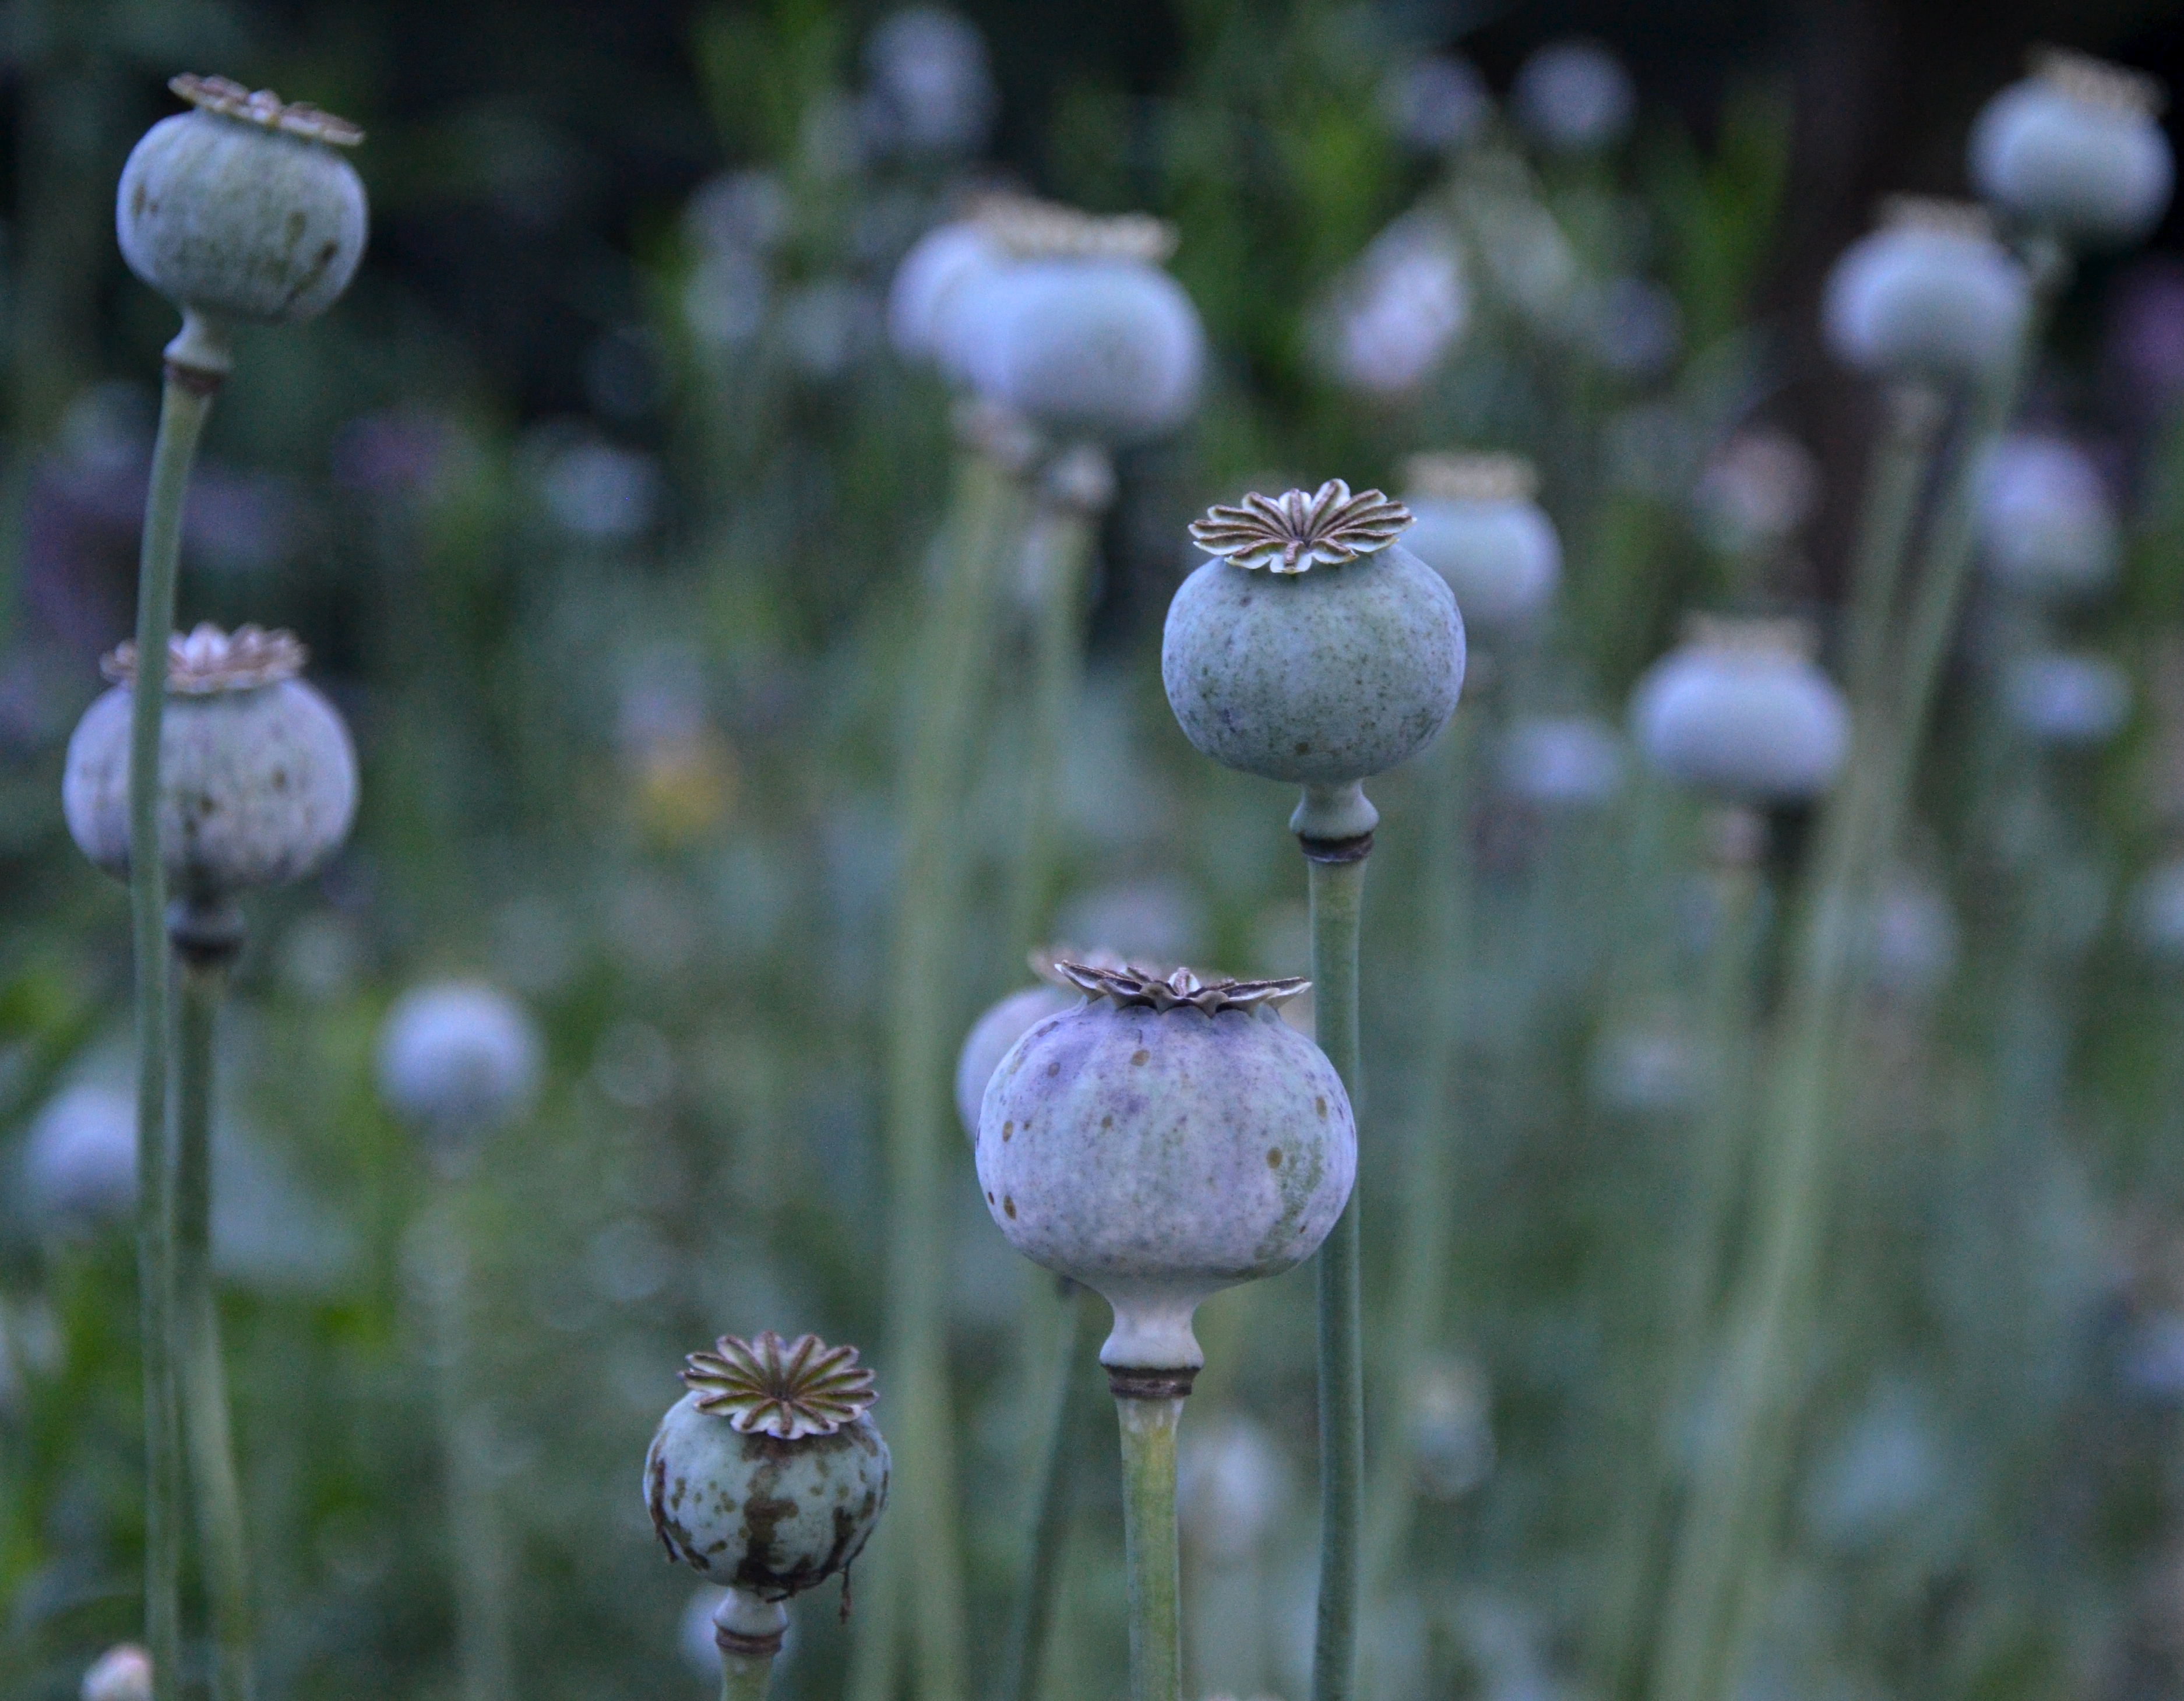 By July the seed heads of the poppies are like ghosts in the dusk.  Soon the goldfinches will balance on the pods and peck holes so that they can eat the seeds inside.